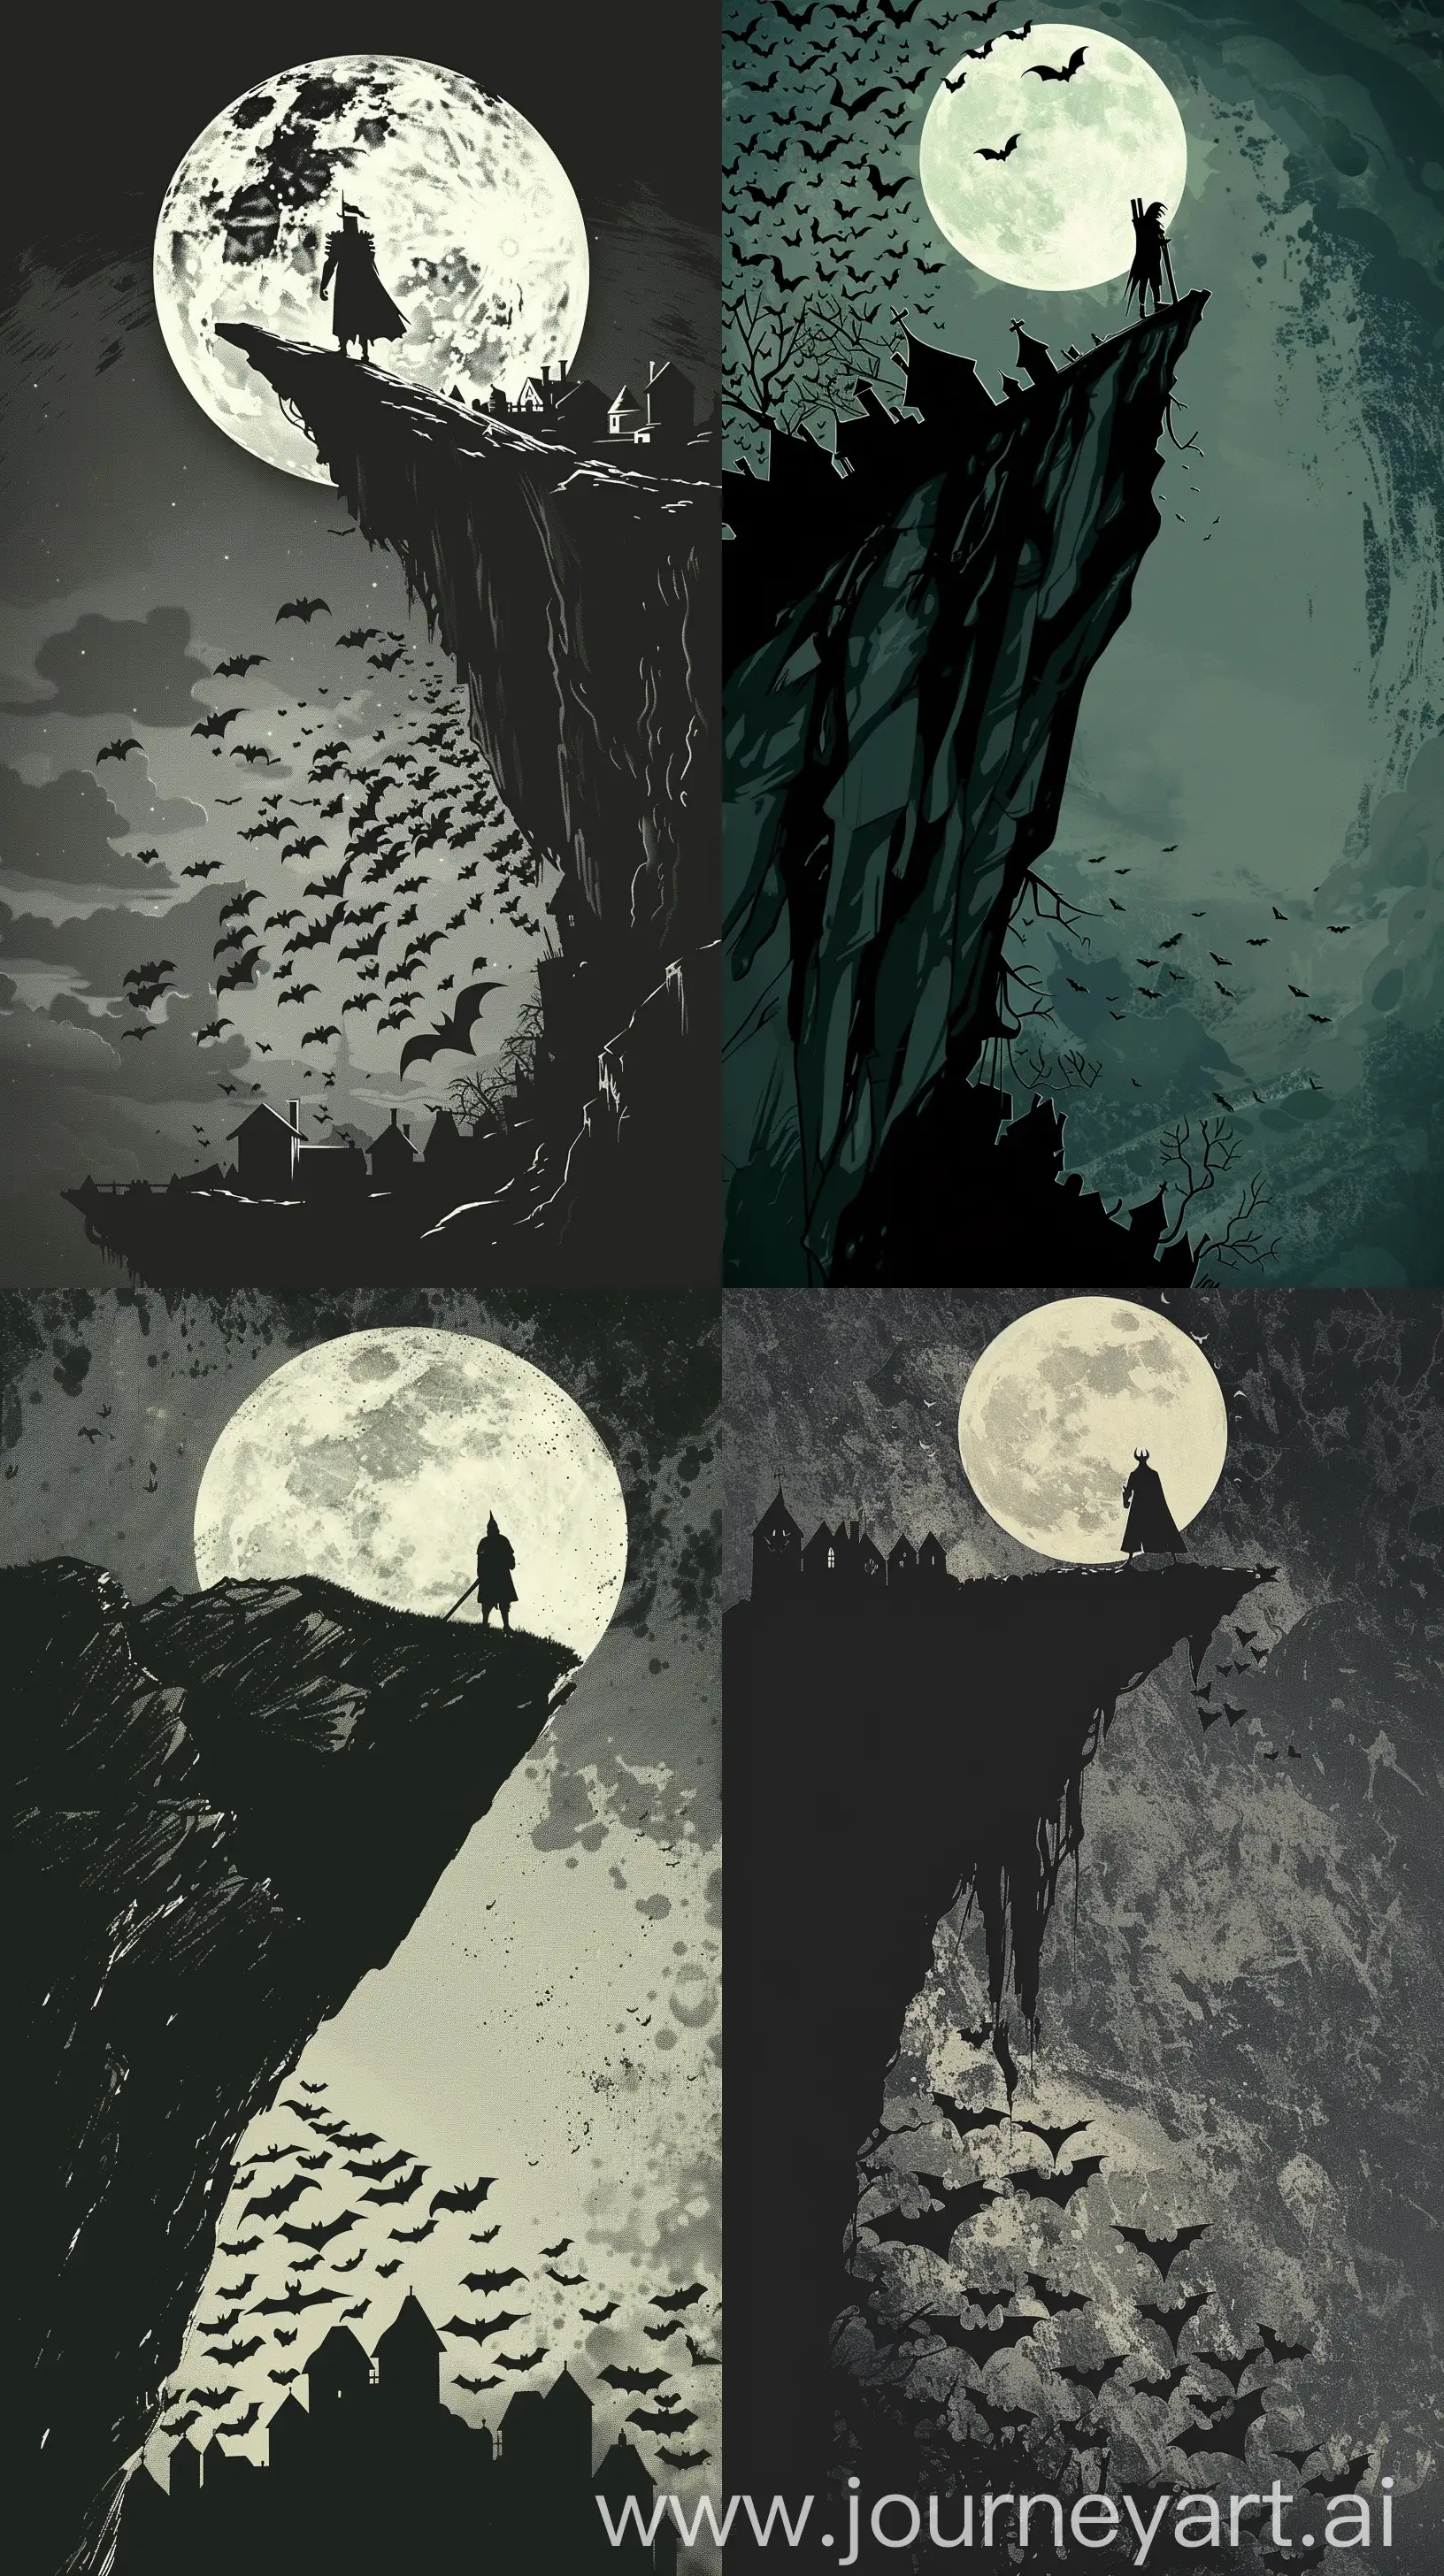 Imagine a phone wallpaper that captures the essence of Mike Mignola's gothic storytelling. A solitary knight stands at the edge of a cliff, overlooking a Mignola-esque haunted village. The moon is full, casting sharp shadows and illuminating the knight's silhouette, with a swarm of bats rising from the abyss below, creating a stark and powerful contrast. --ar 9:16